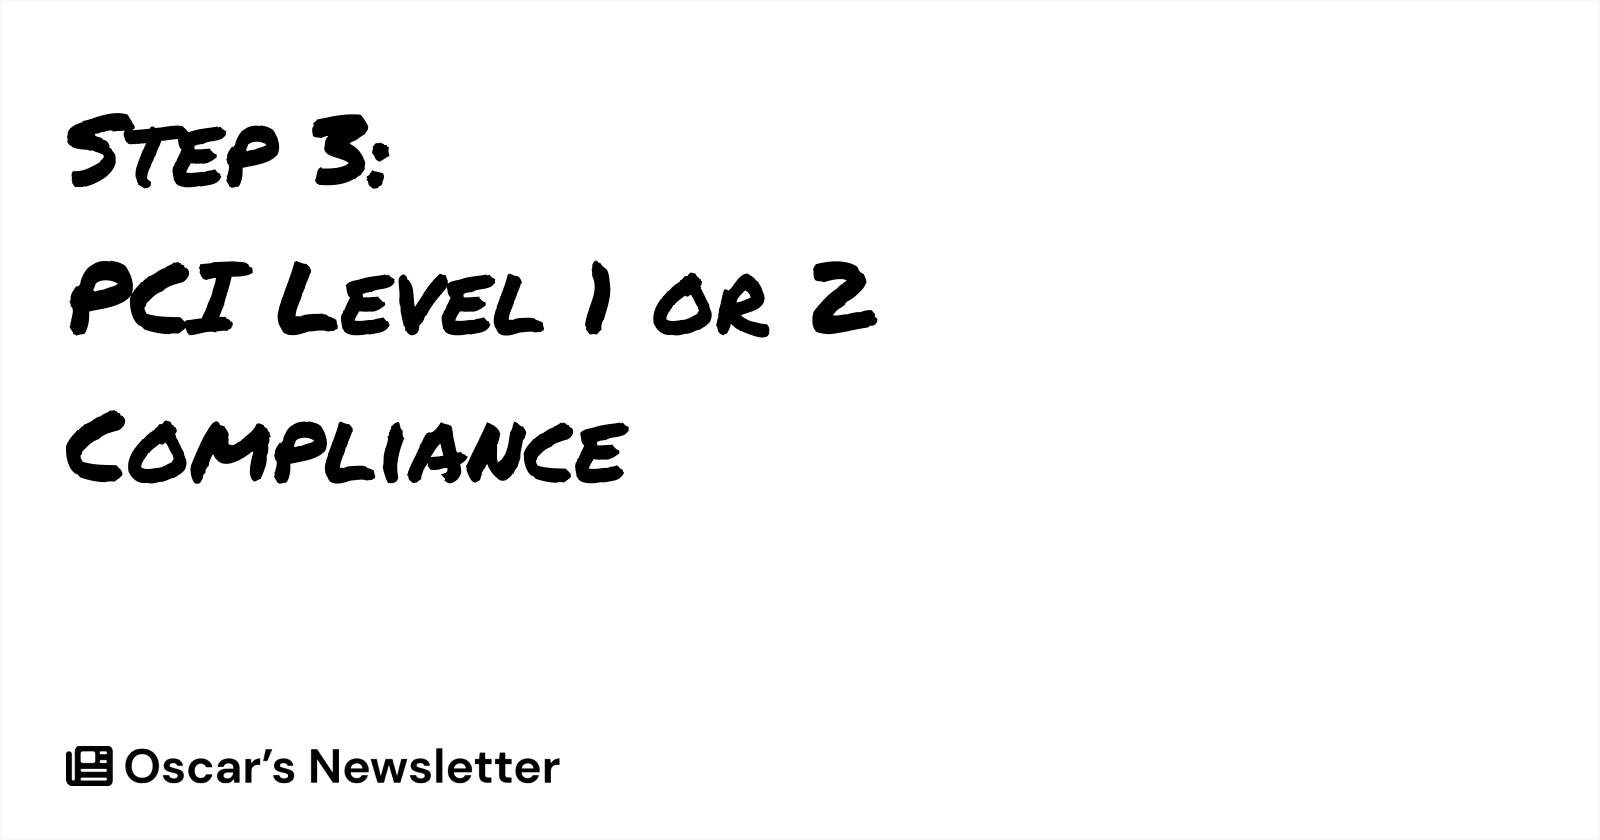 Step 3: PCI Level 1 or 2 Compliance in Permanent Marker Font